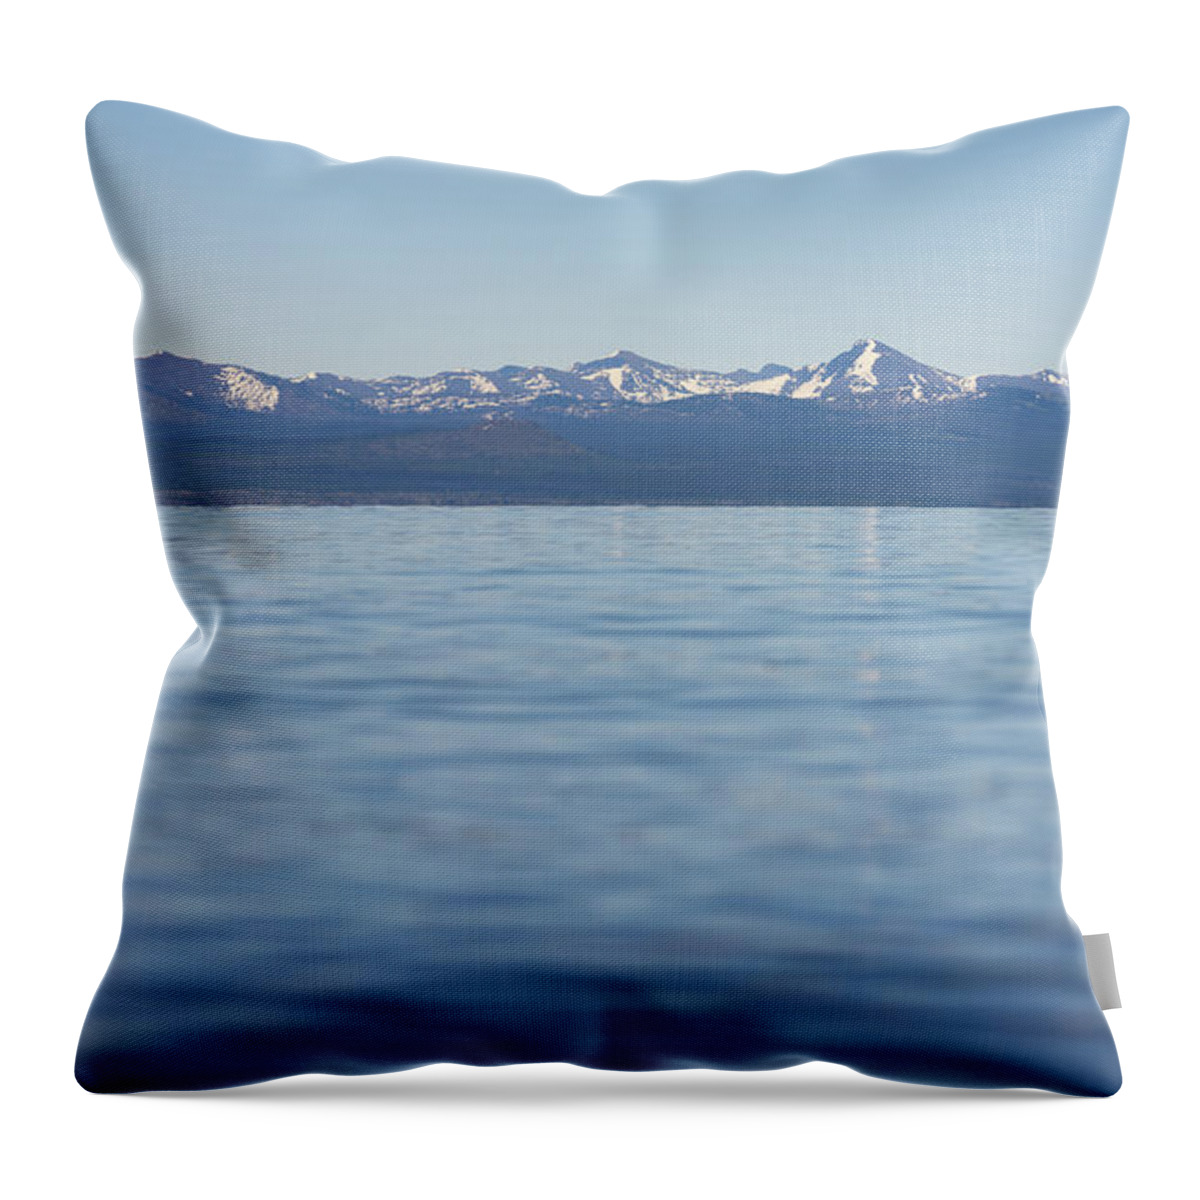 Yellowstone Throw Pillow featuring the photograph Yellowstone Lake Blues by Darren White